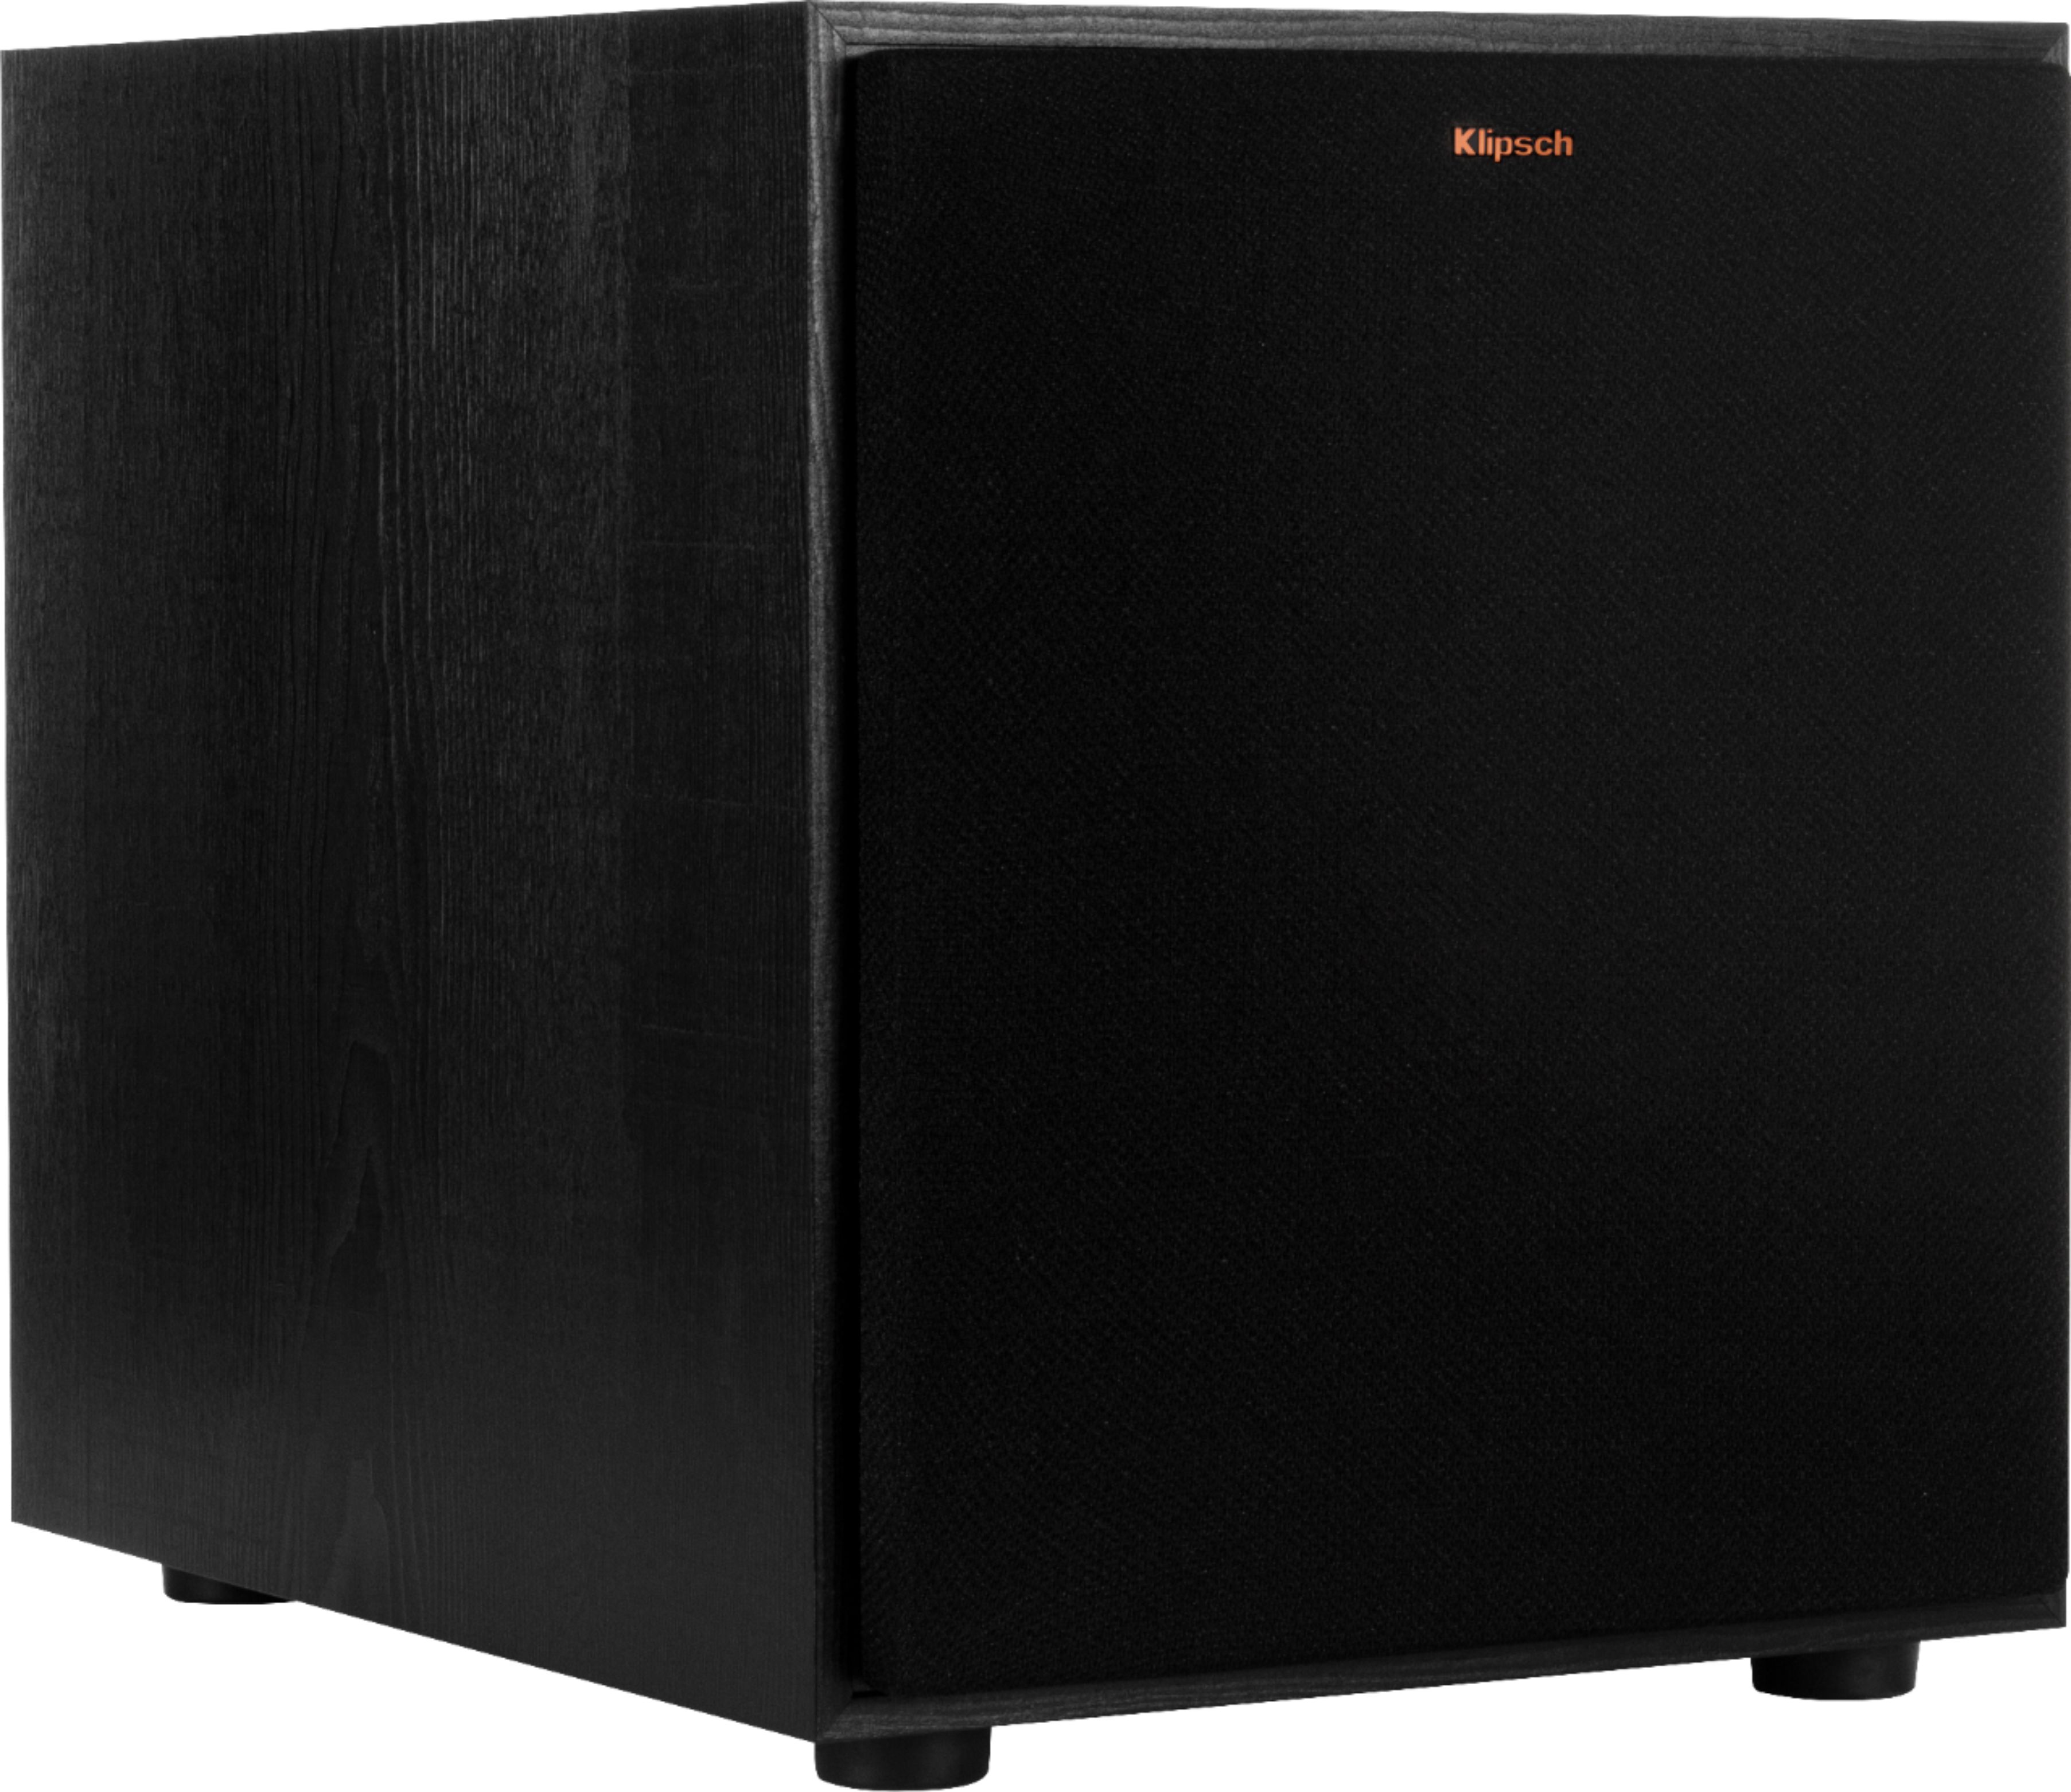 Angle View: Klipsch - Reference Series 10" 150W Powered Subwoofer - Black